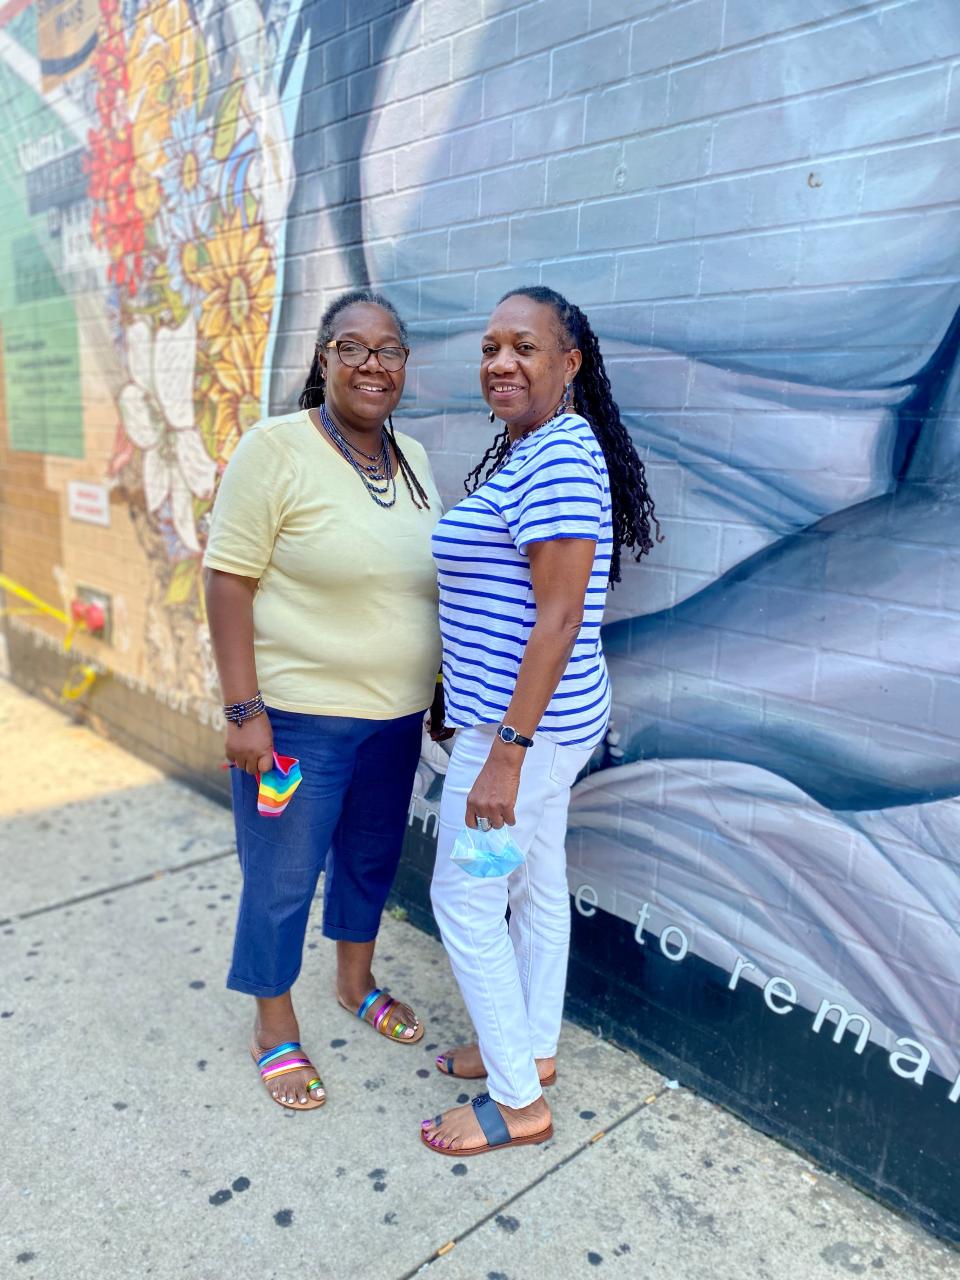 Quibila Divine and Sylvia Simms are sisters who were bused to a predominantly white school in Philadelphia when they were young. Both work in youth and education advocacy.